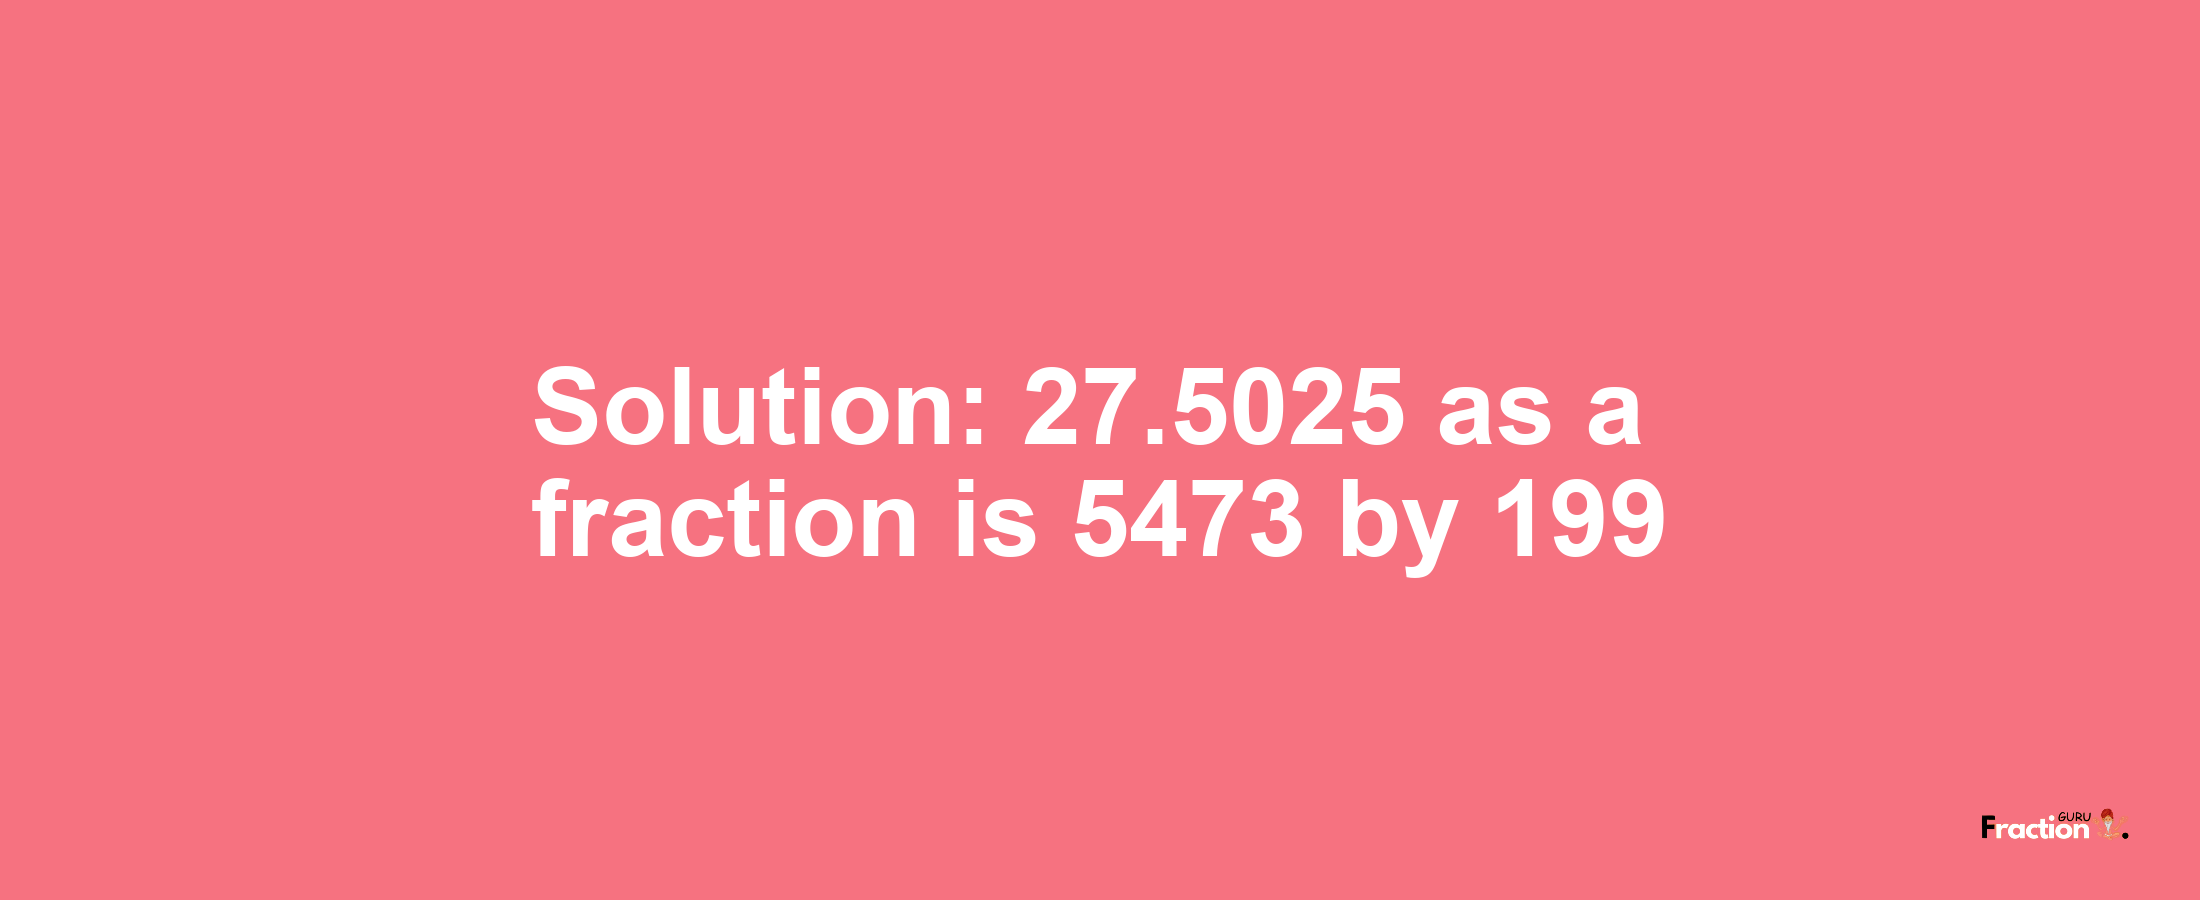 Solution:27.5025 as a fraction is 5473/199